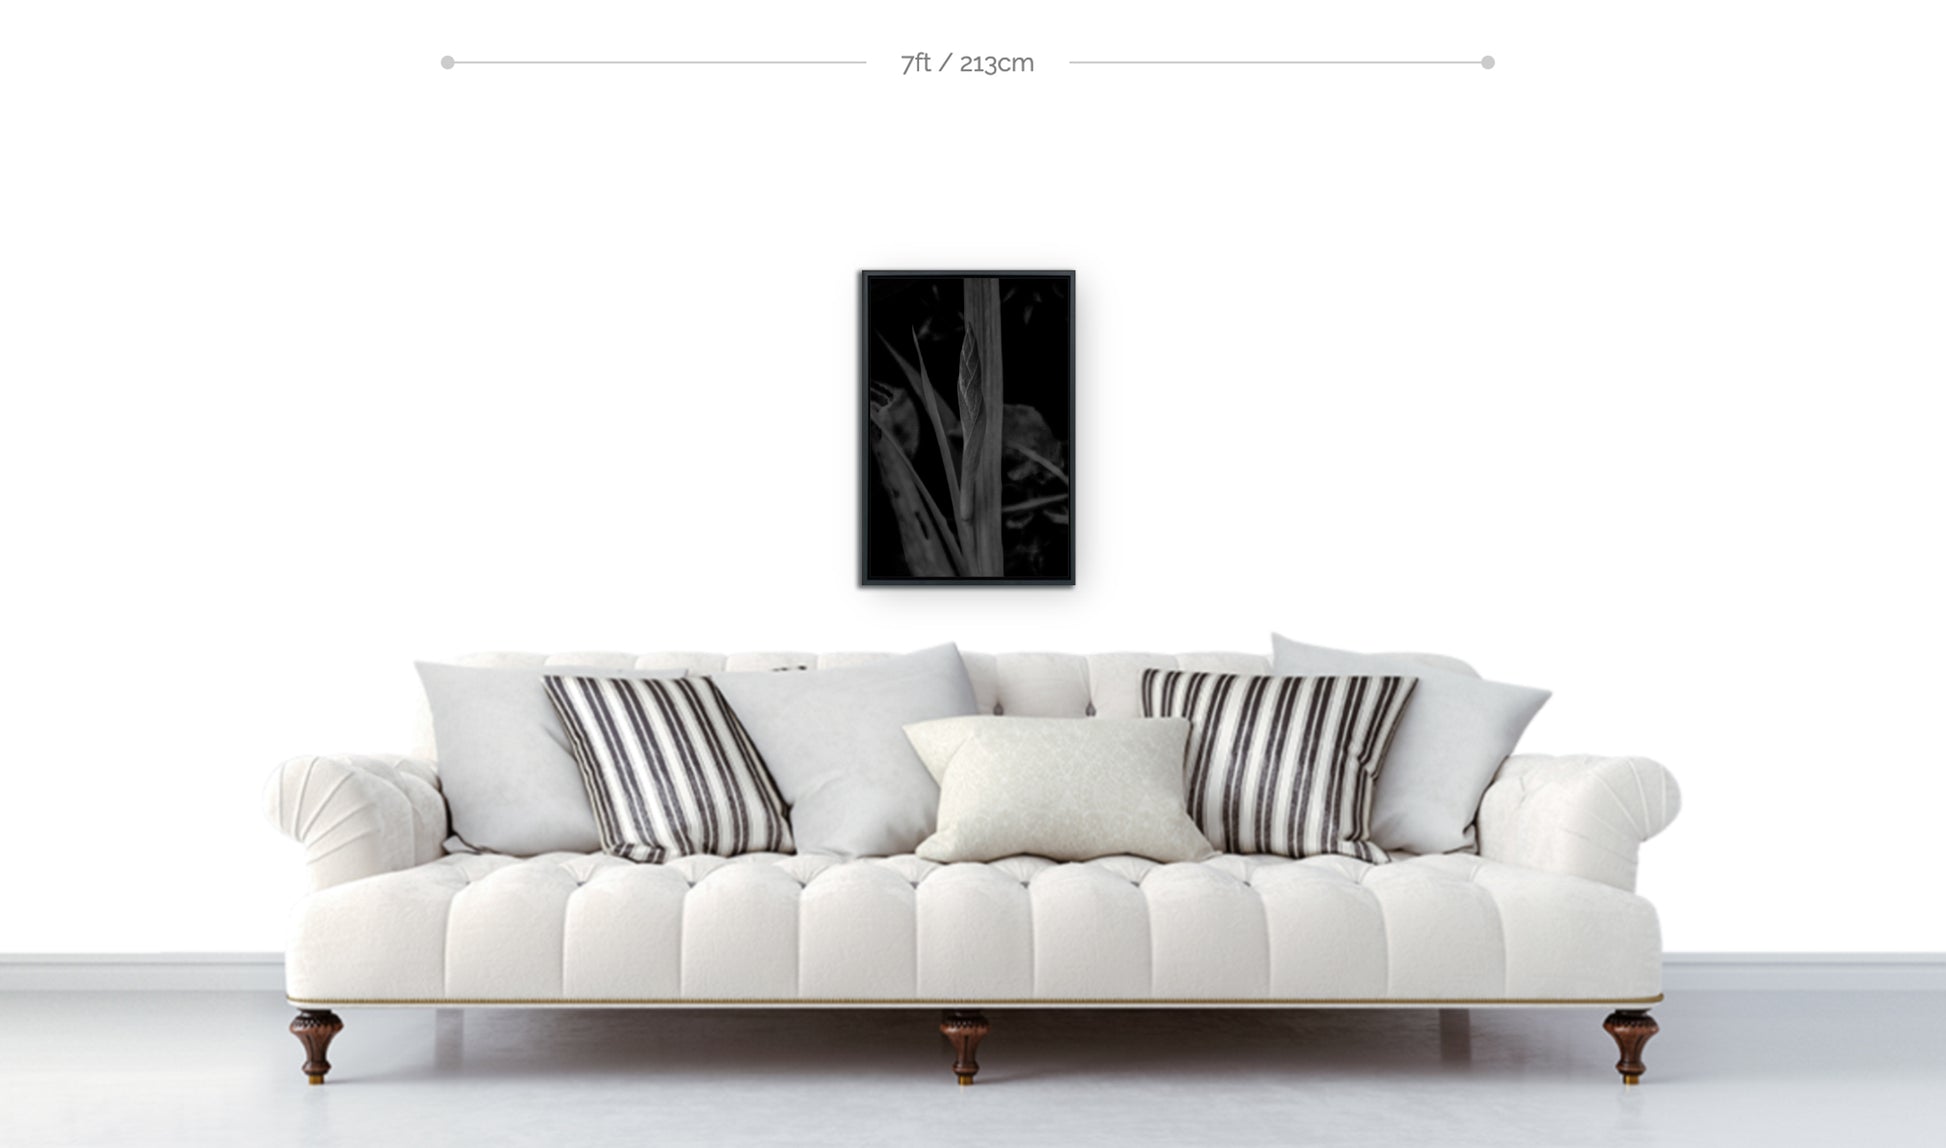 Botanical wall decor preview 24x16 framed print displayed hanging above sofa